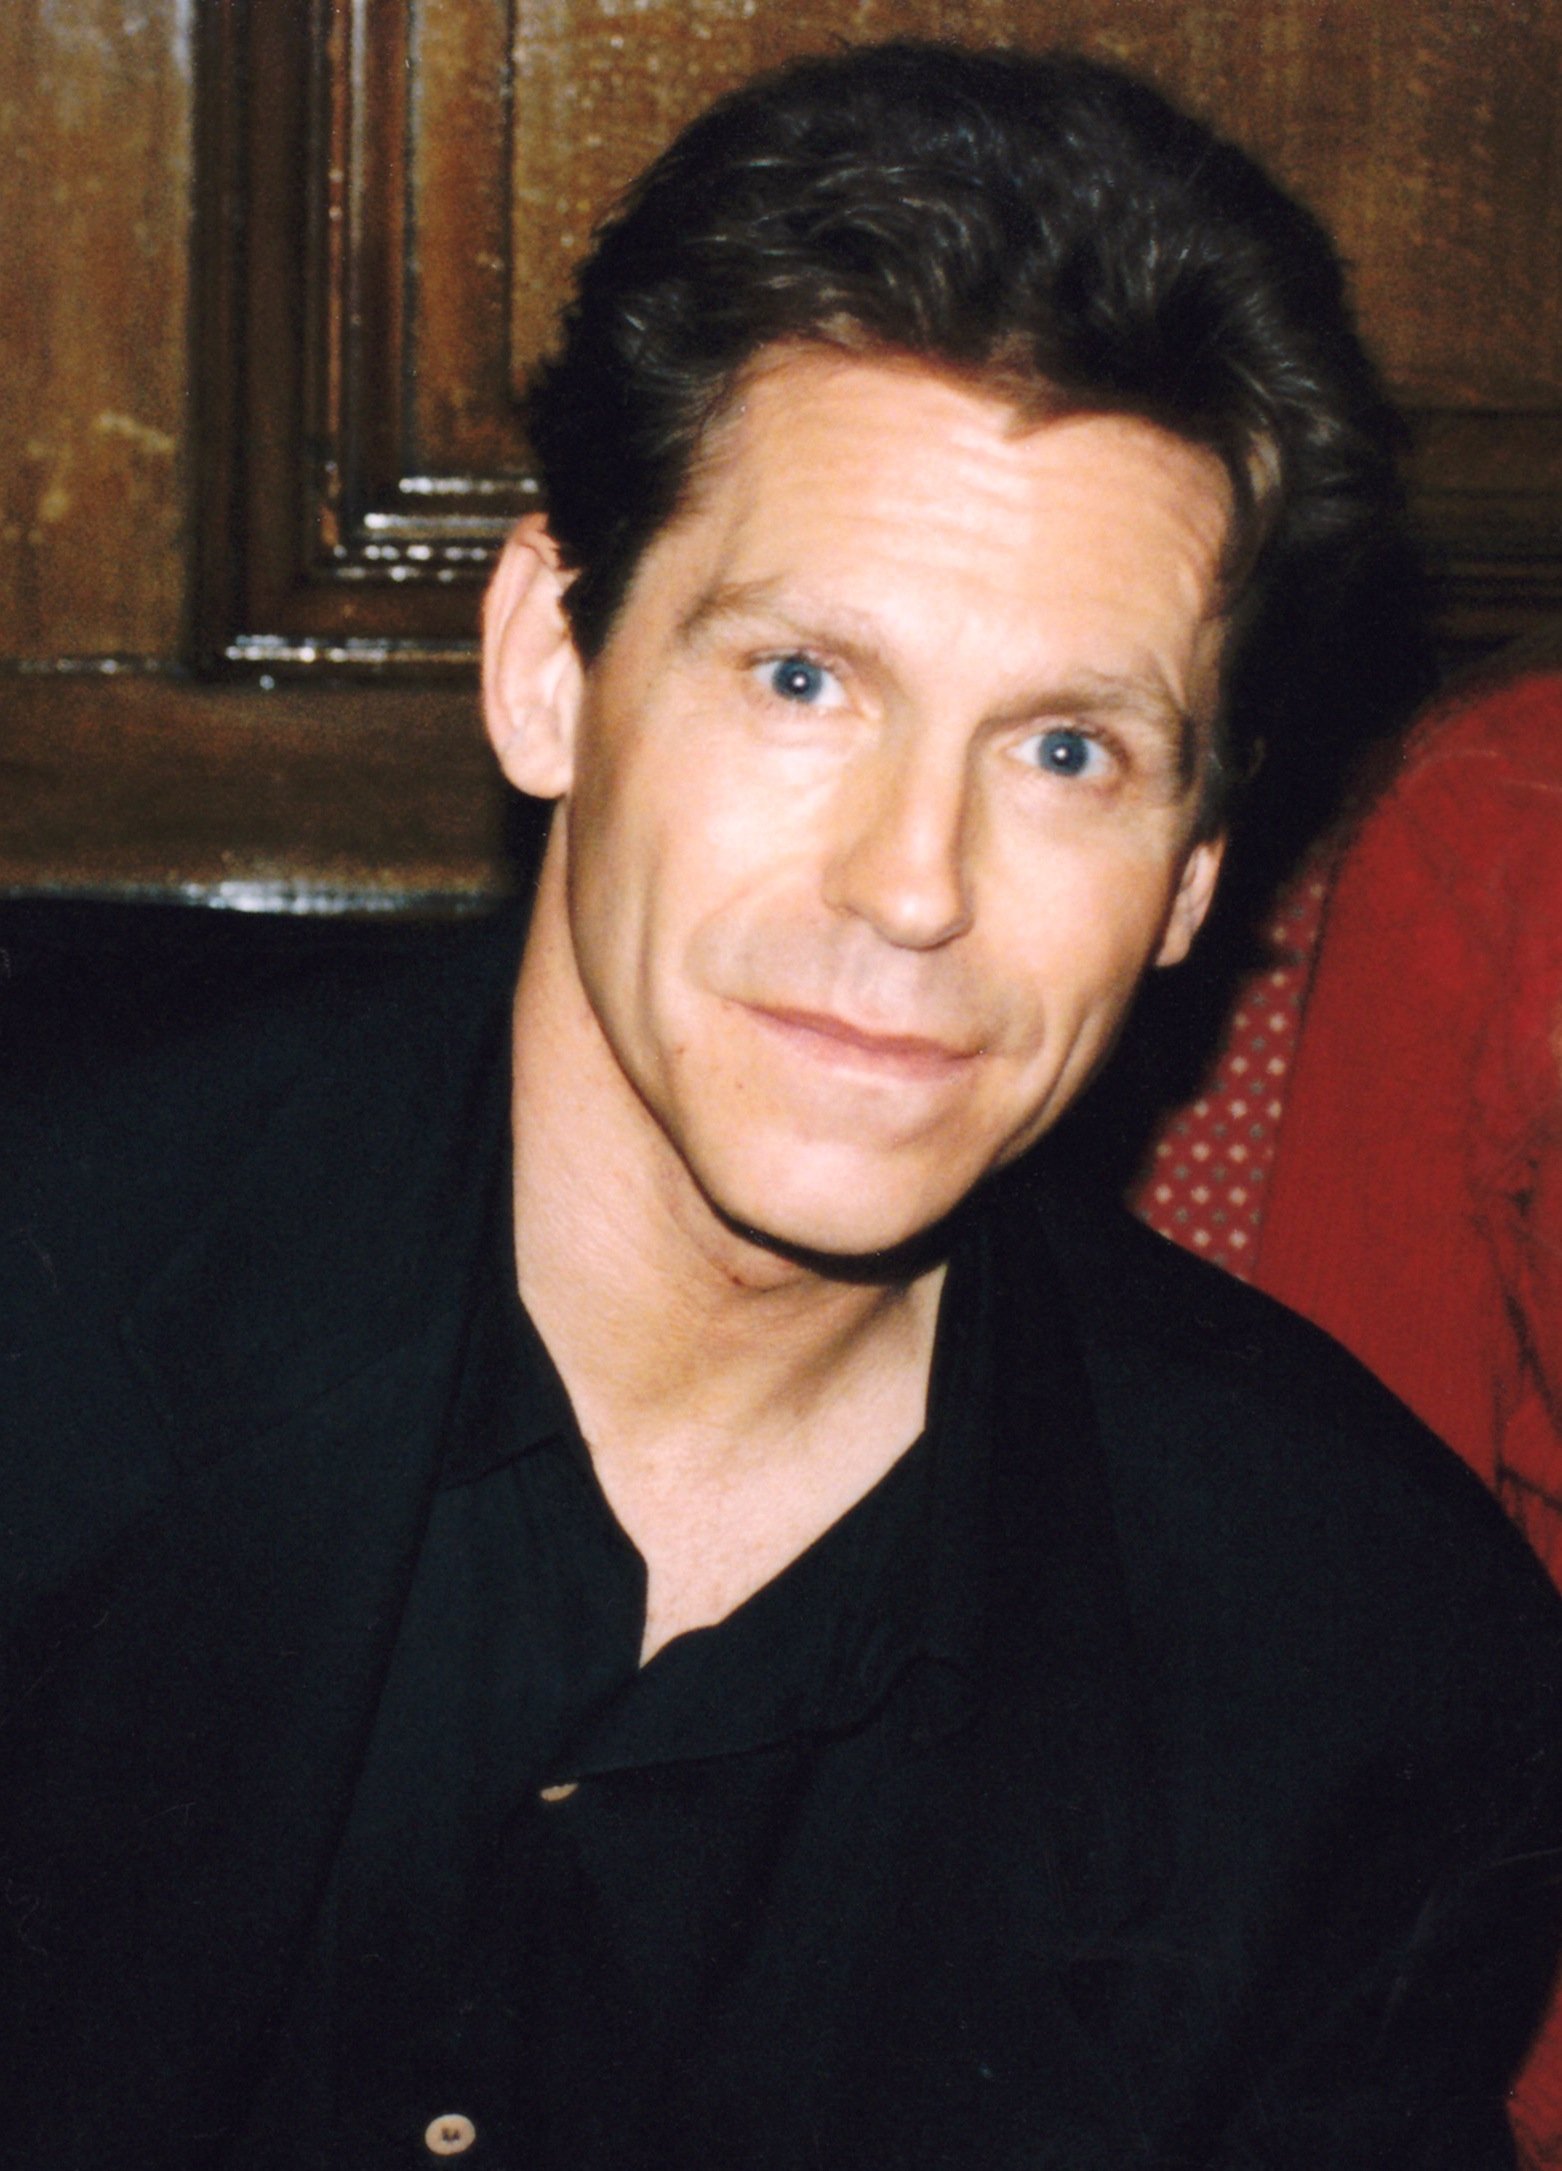 Jeff Conaway at a TV convention in 1998 | Photo: CC BY-SA 2.0, Wikimedia Commons Images